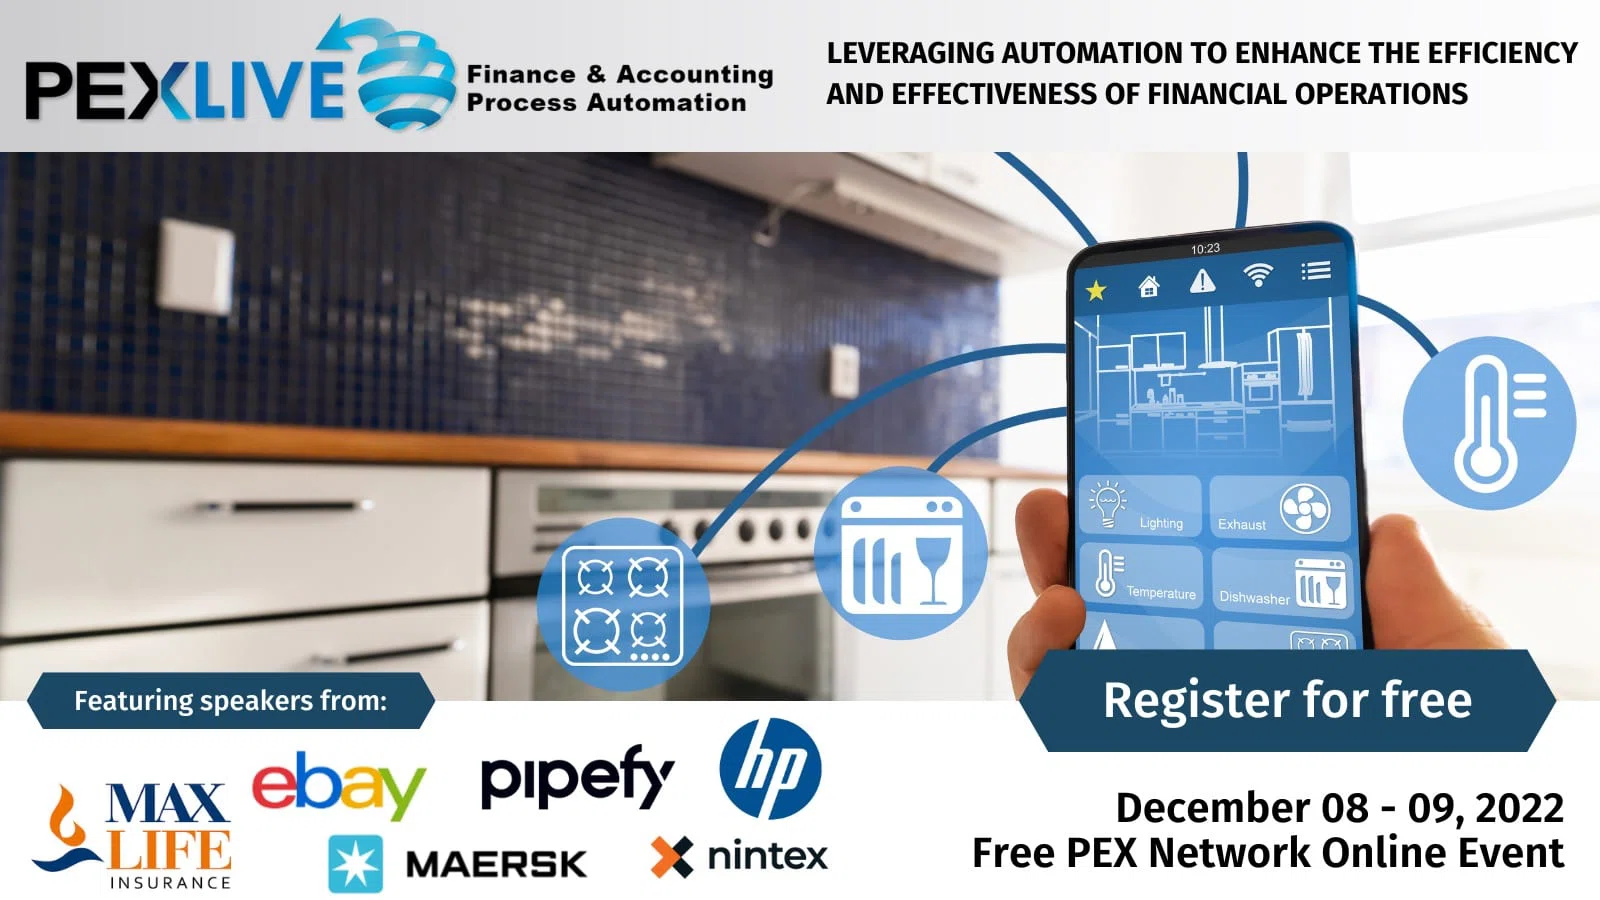 PEX Live: Finance & Accounting Process Automation 2022